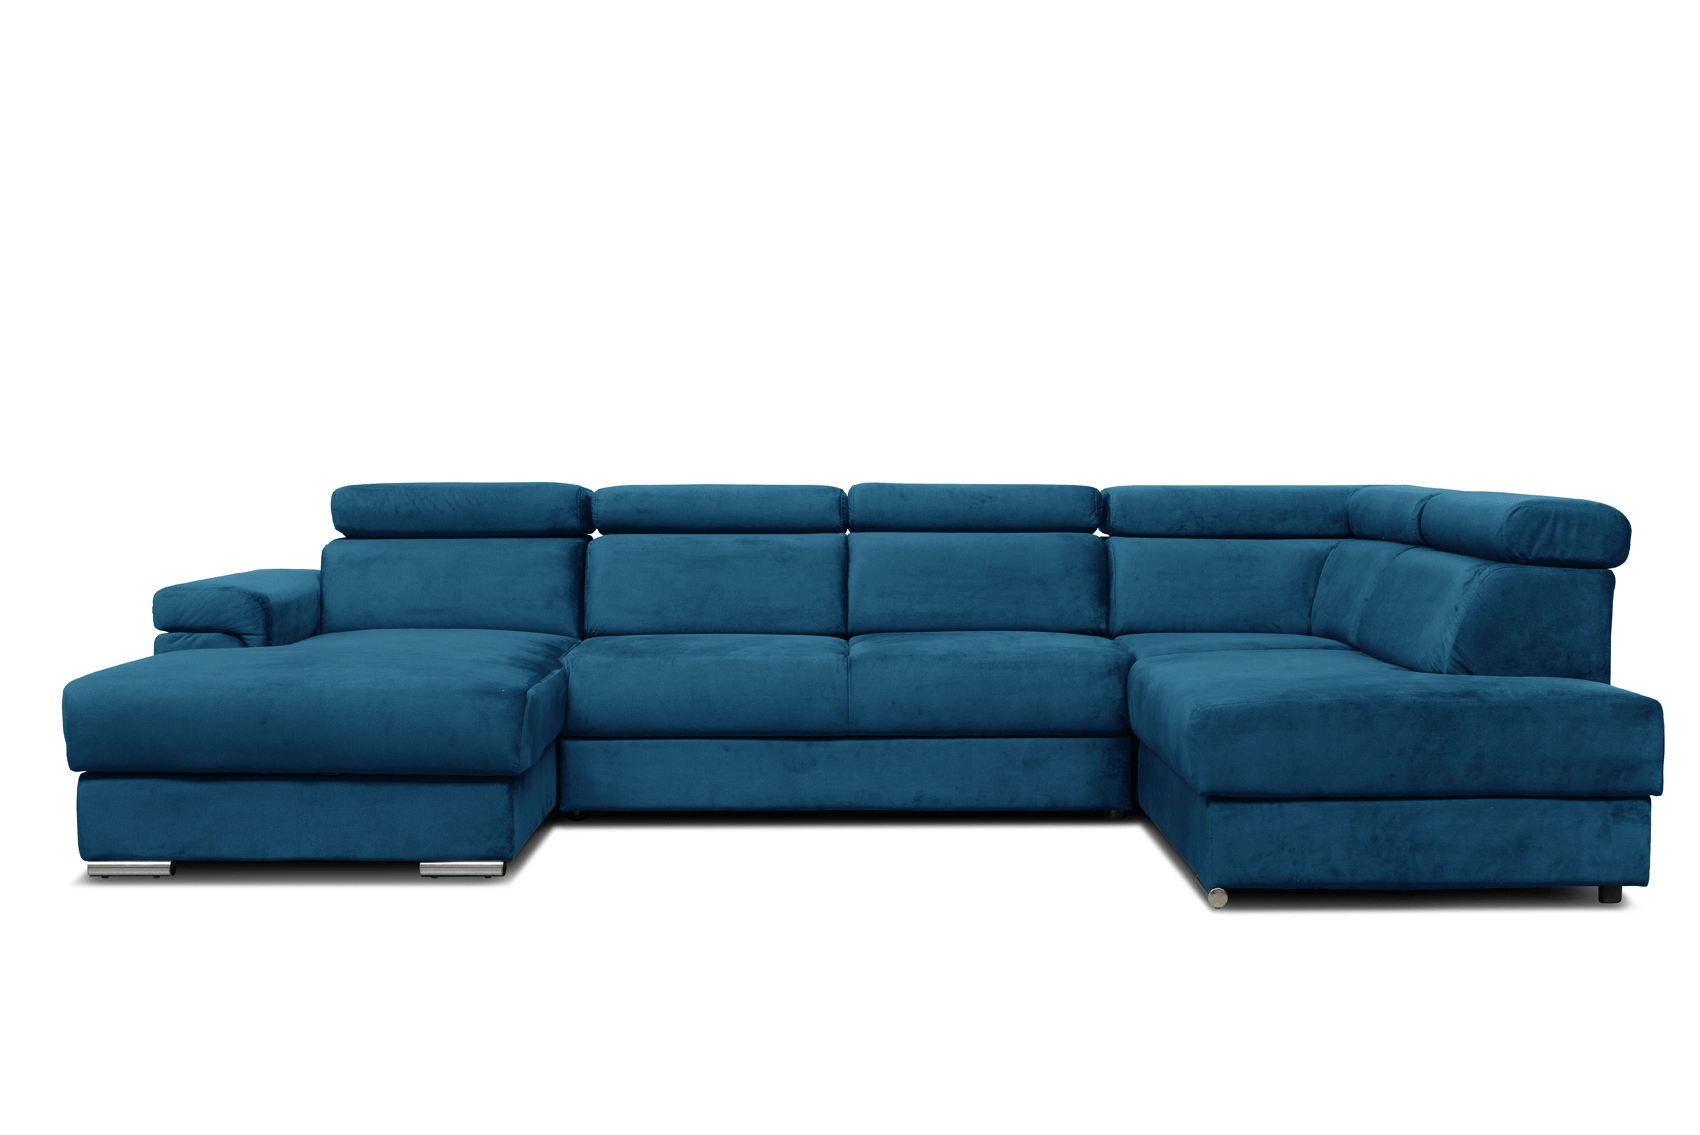 Living Room Furniture Sleepers Sofas Loveseats and Chairs Carlo U-Shaped Sectional